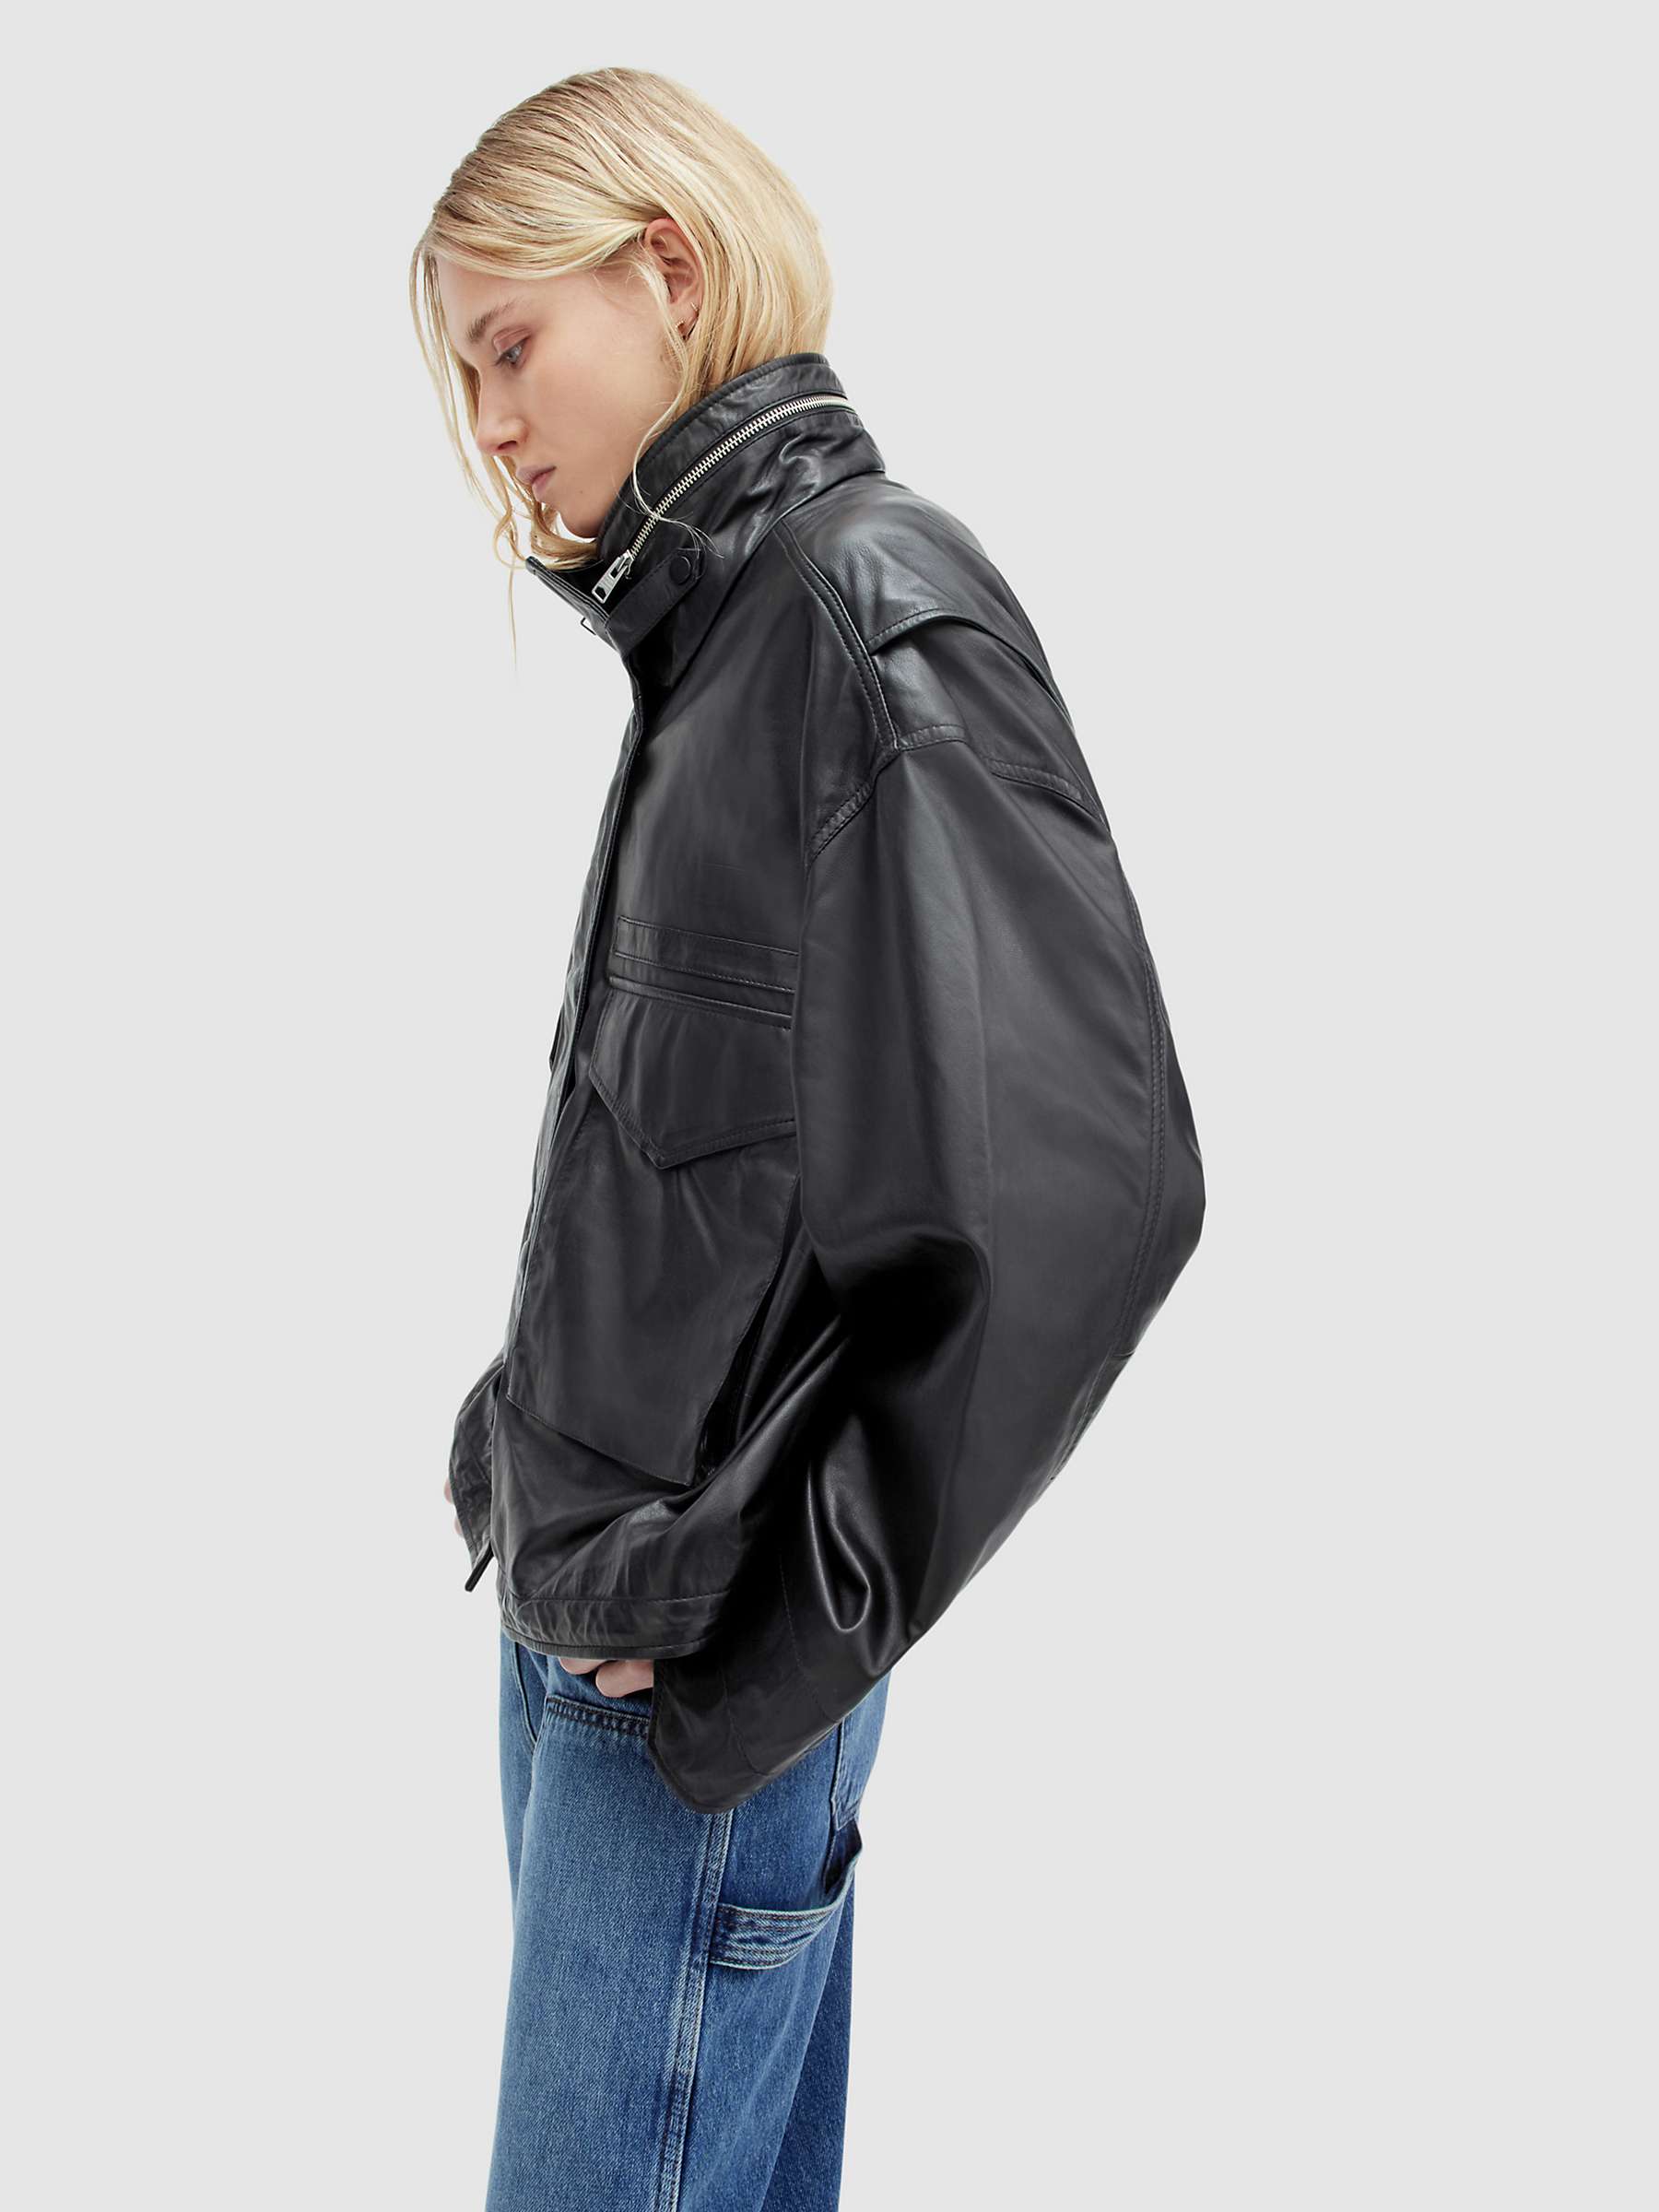 Buy AllSaints Clay Sheep Leather Jacket, Black Online at johnlewis.com